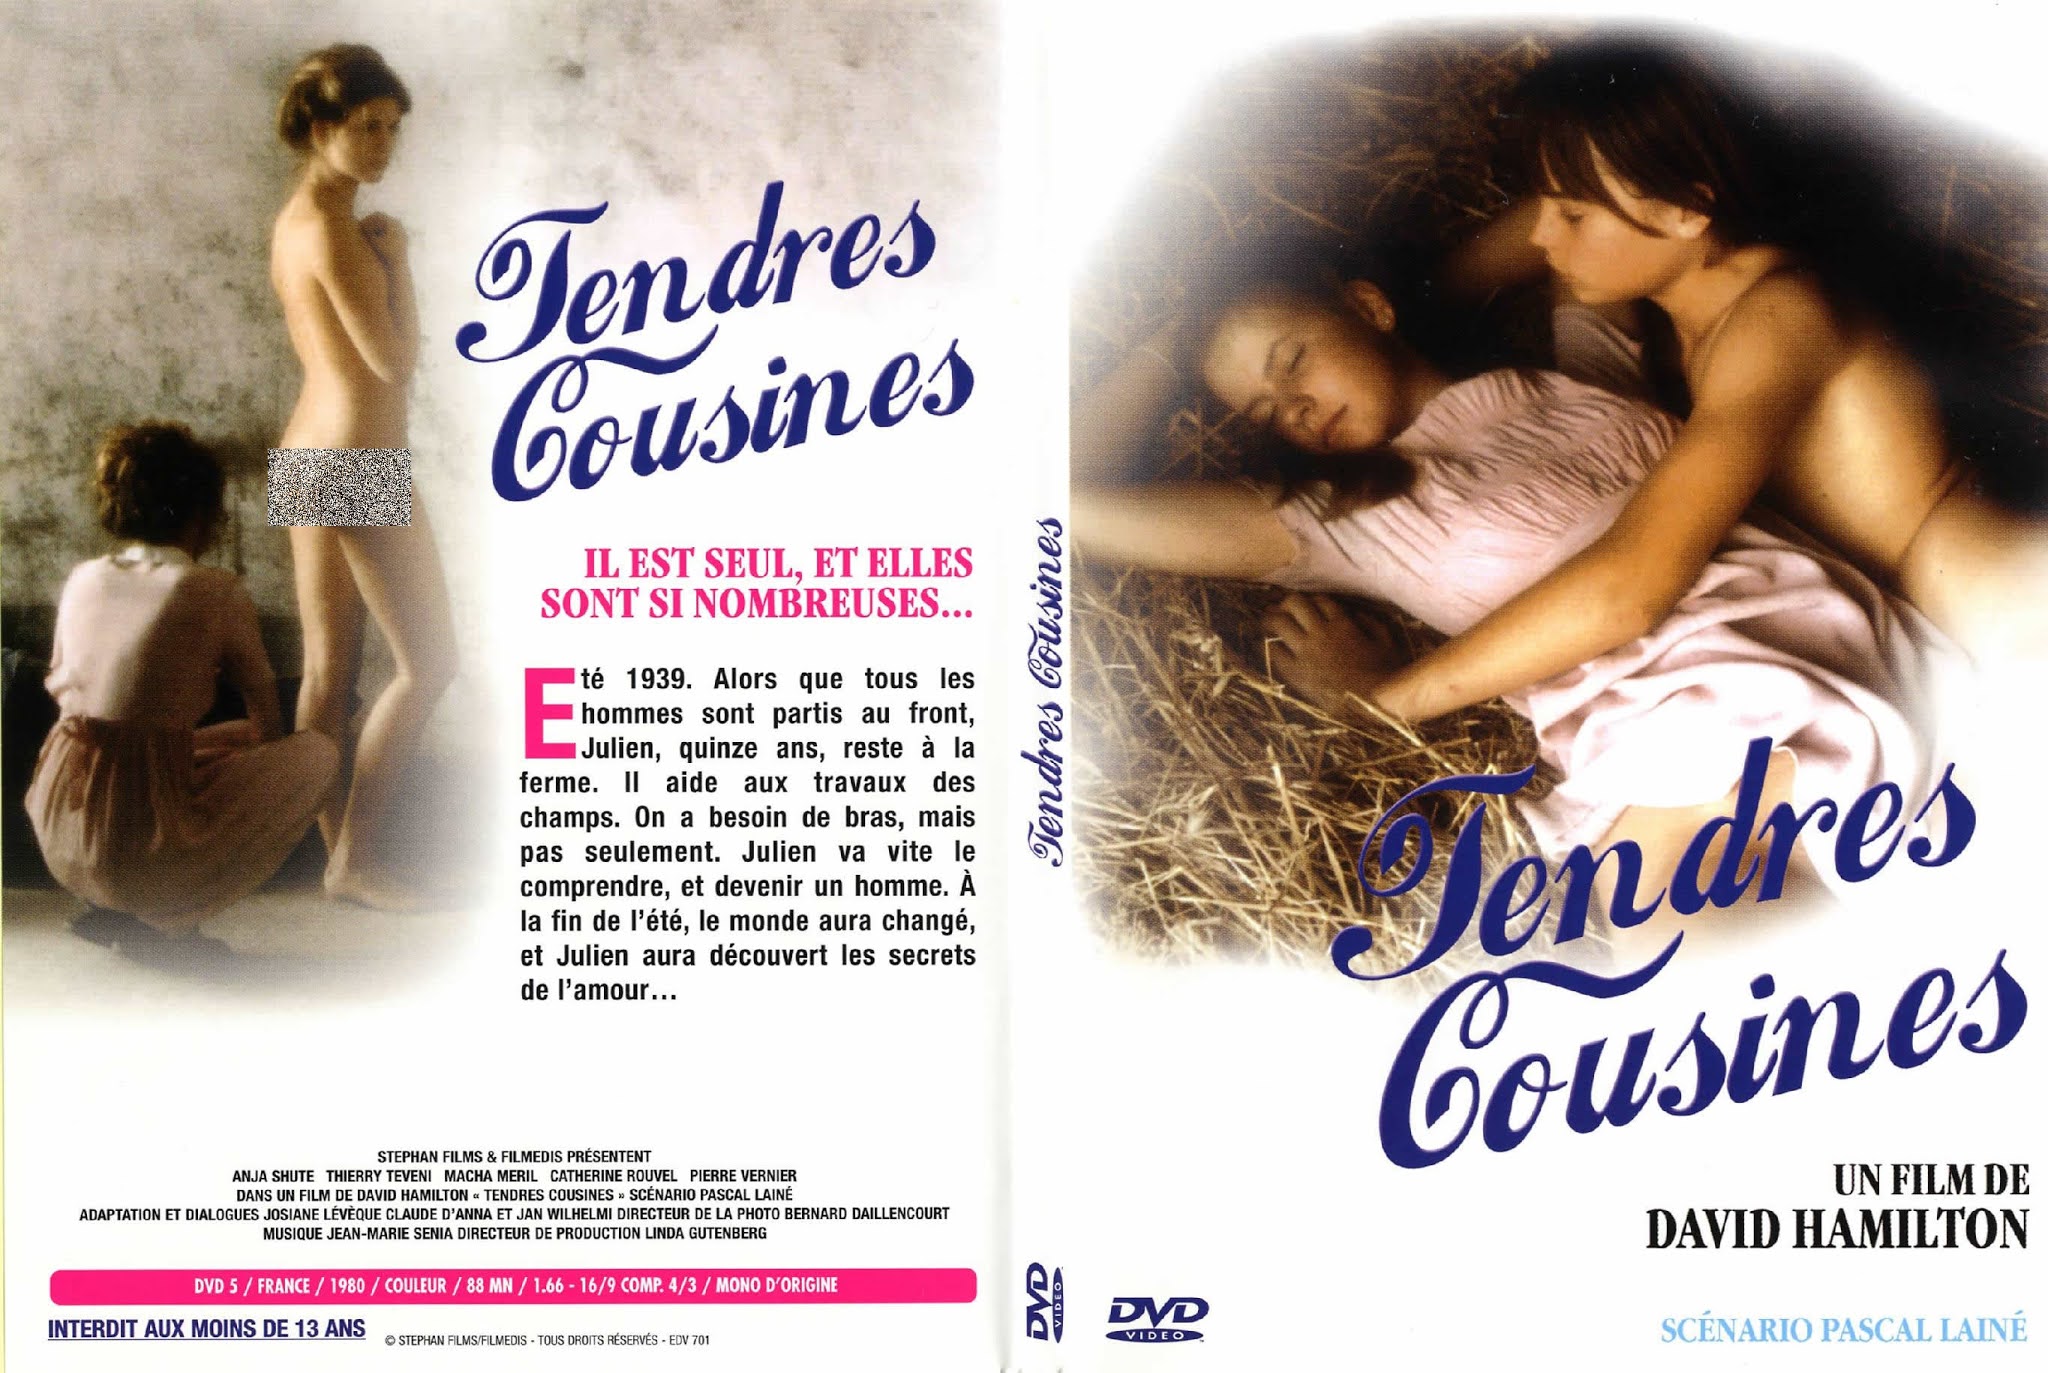 Tendres Cousines (English: Tender Cousins) is a 1980 French film directed b...